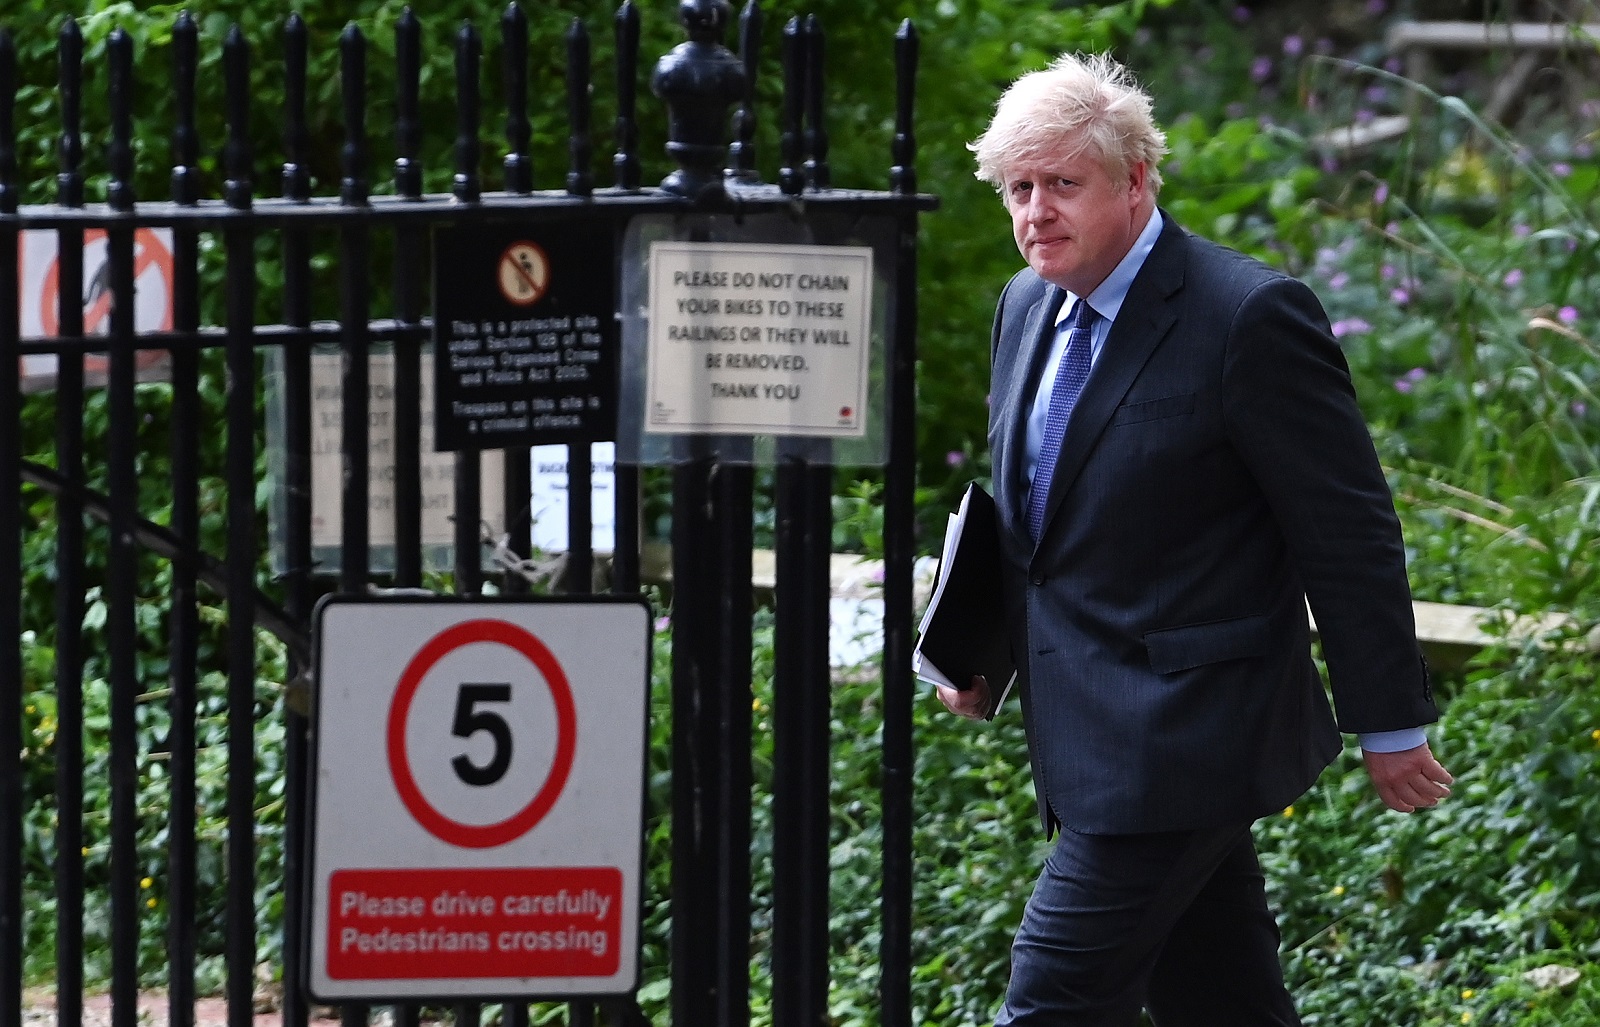 epa09271590 British Prime Minister Boris Johnson at 10 Downing Street following his press conference in London, Britain, 14 June 2021. British Prime Minister Johnson announced a month delay to lockdown easing regulations. The UK government is to delay for a further four weeks to full reopening due to a significant rise in Delta variant Covid-19 cases across England.  EPA/ANDY RAIN